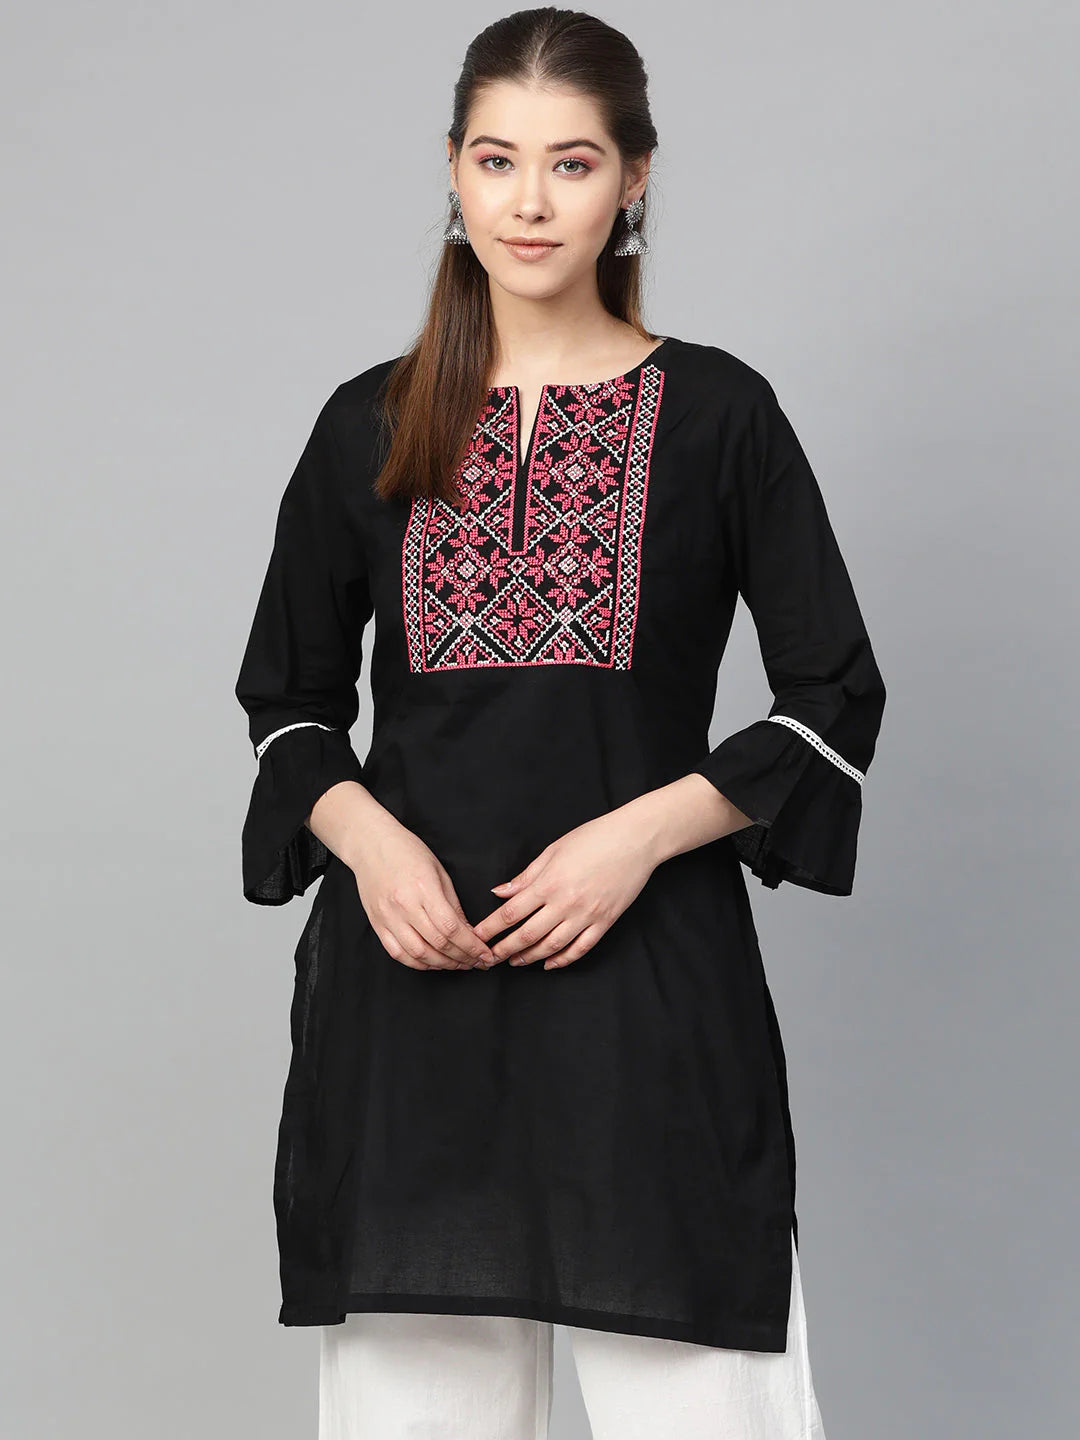 Women's Black Embroidered Tunic - Bhama Couture USA